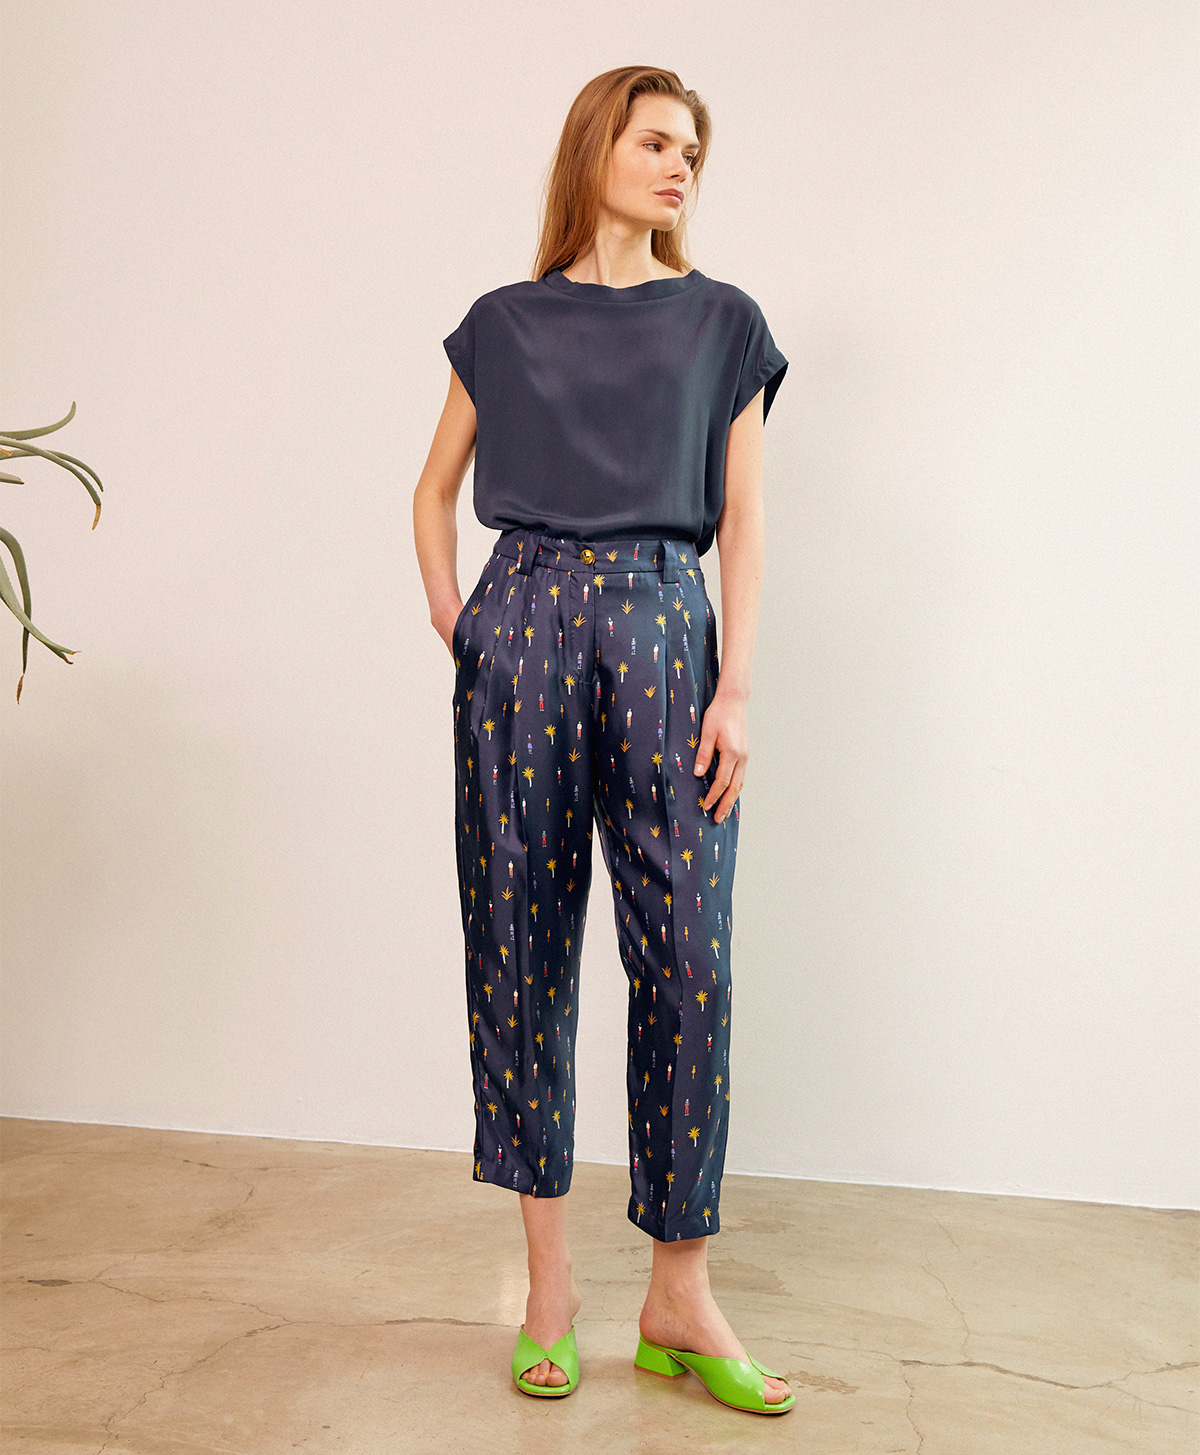 CREPUSCOLO PANTS IN PRINTED SILK TWILL - BLUE/RED - Momonì